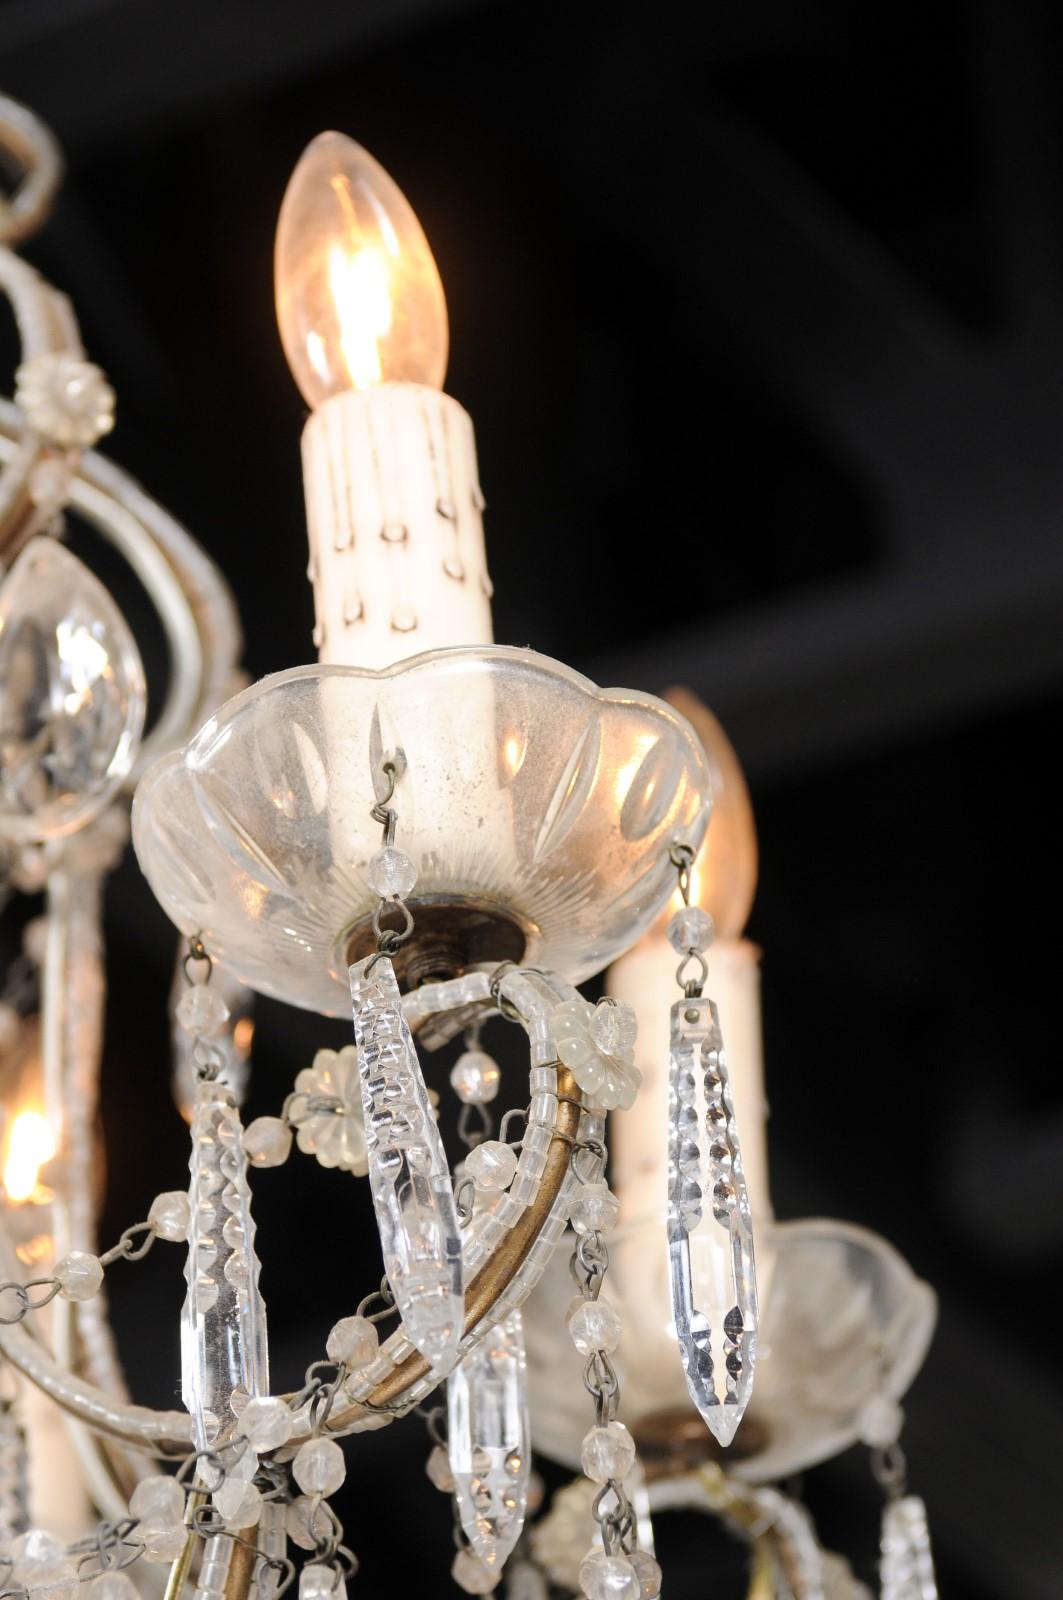 Italian 19th Century Six-Light Chandelier with Beaded Arms and Spear Crystals For Sale 1